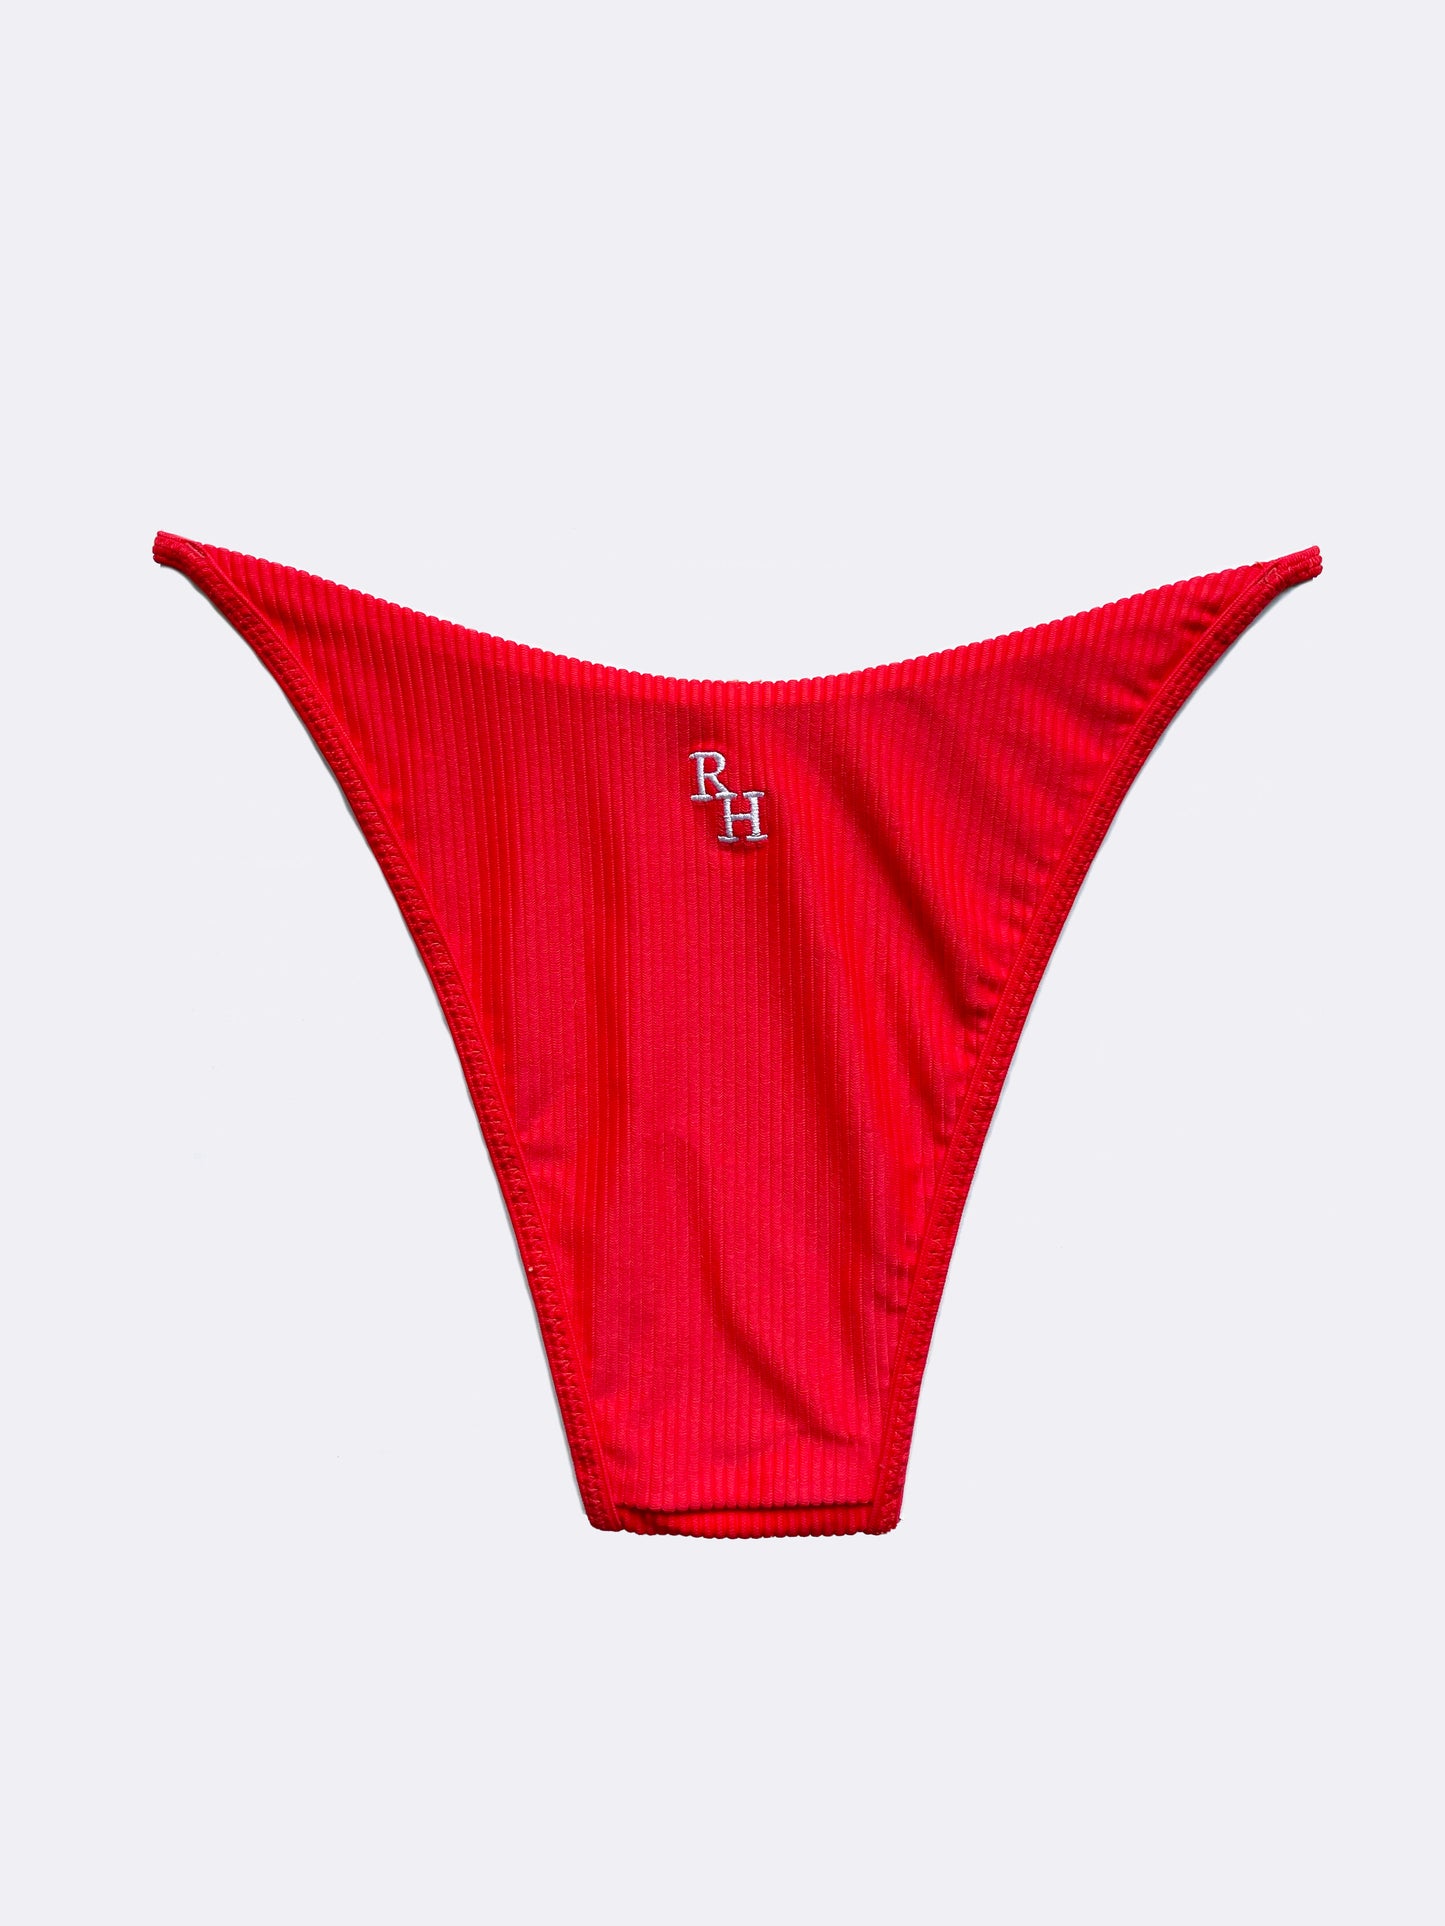 The Cape Ribbed Swim Bottom in Red